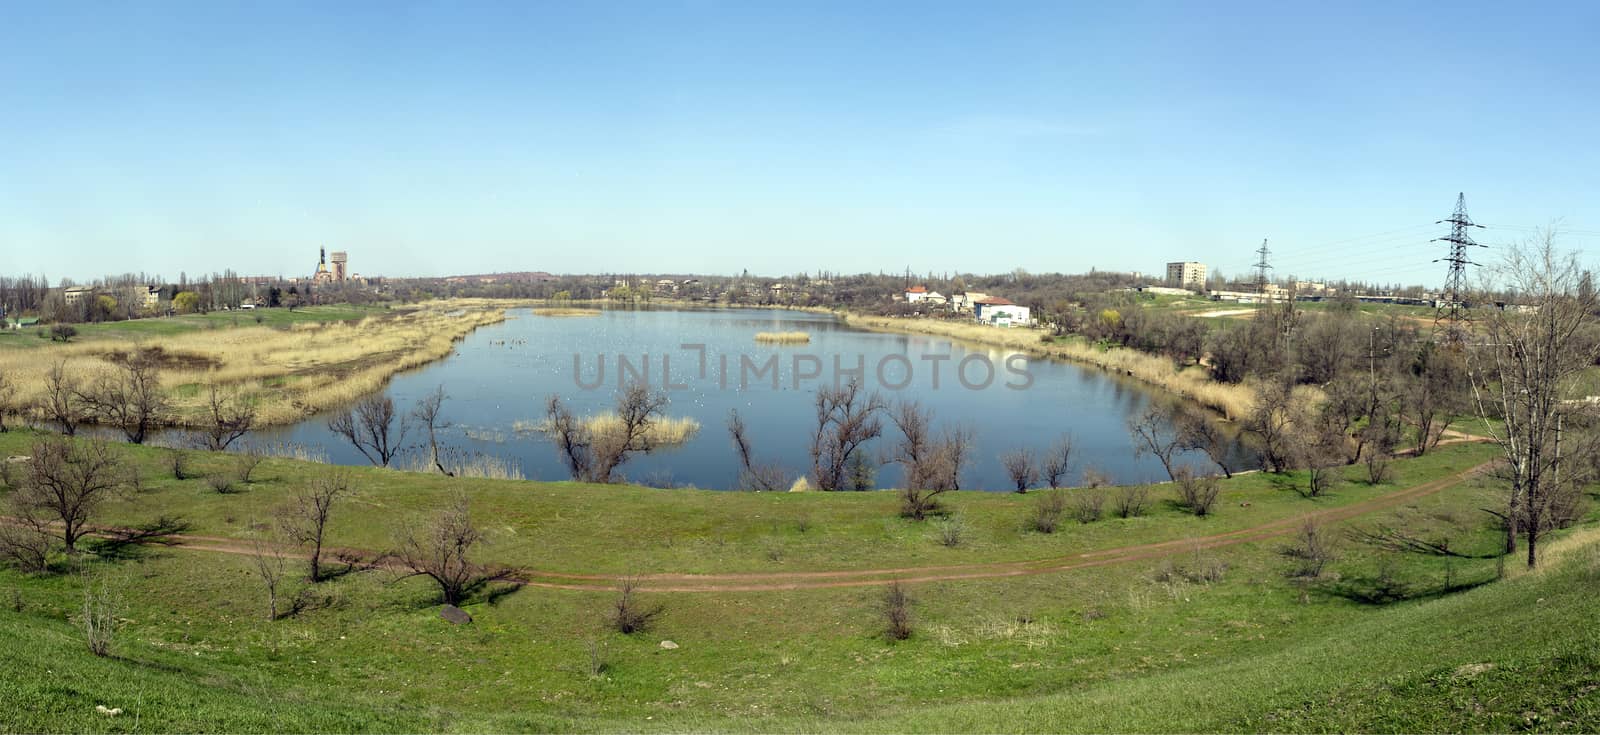 
Panoramic view of the industrial city of Krivoy Rog in Ukraine